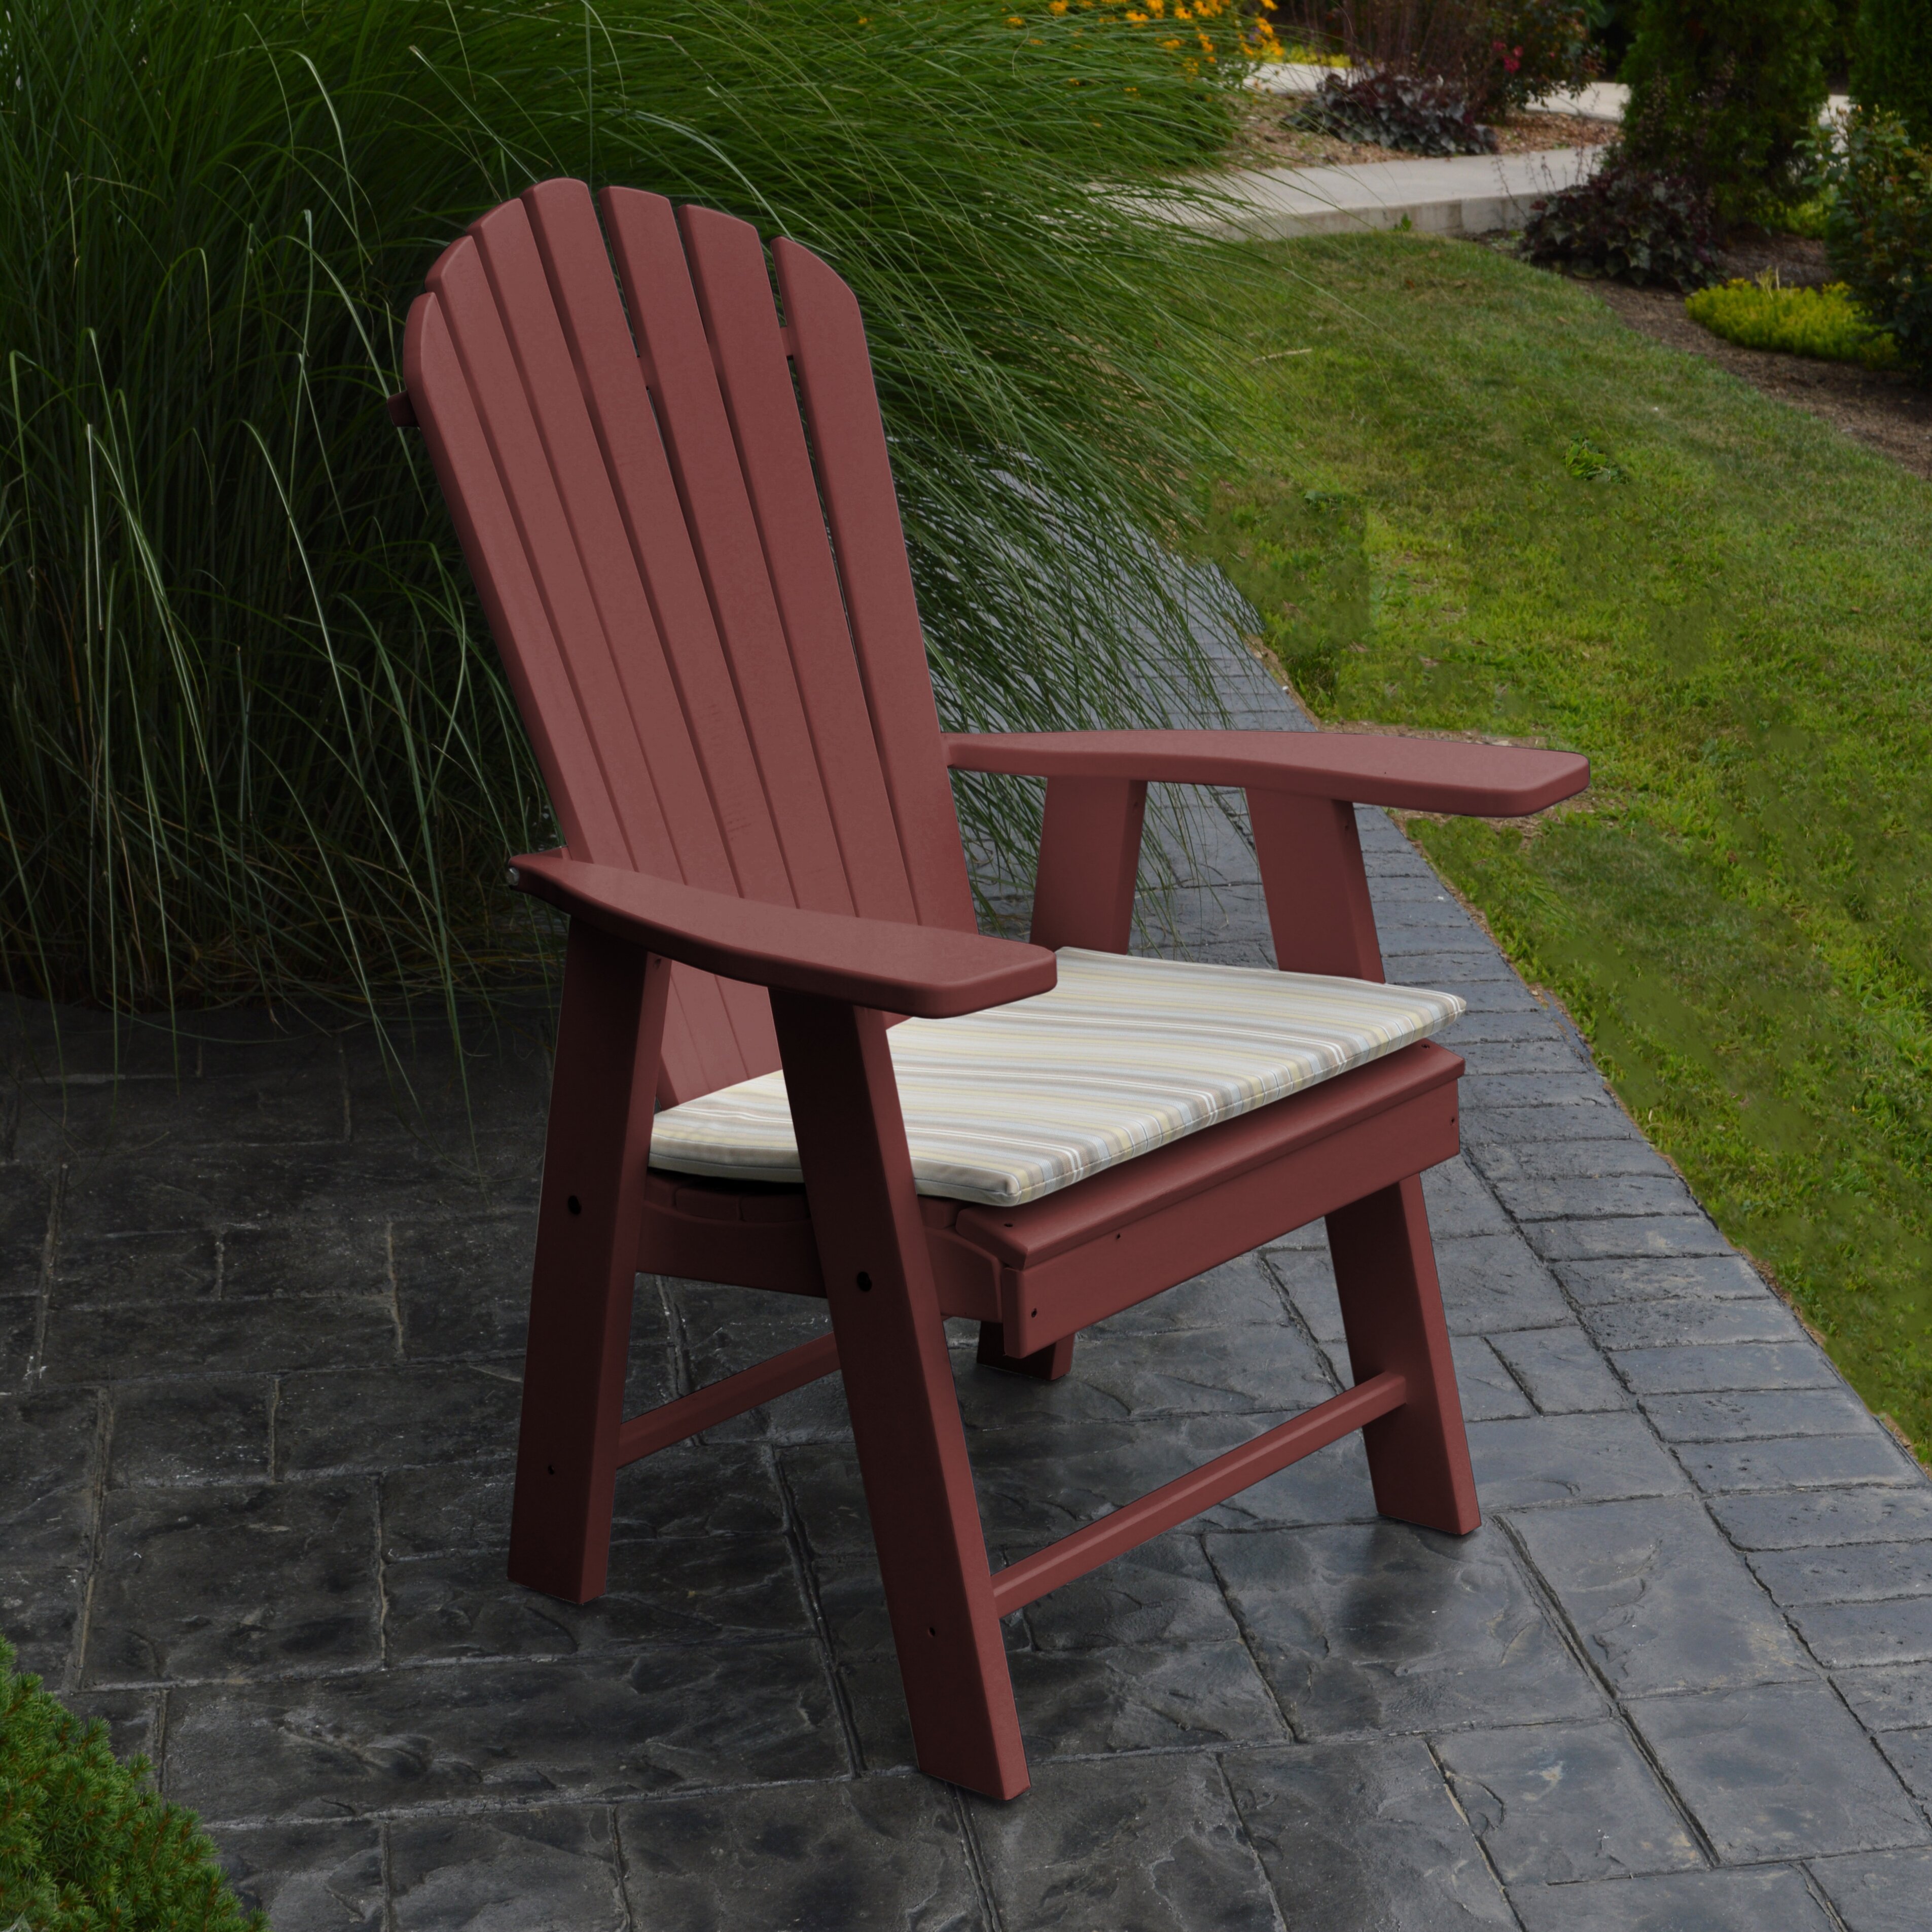 Wayfair Is Having an Epic Sale on Adirondack Chairs for the Fourth of July â€